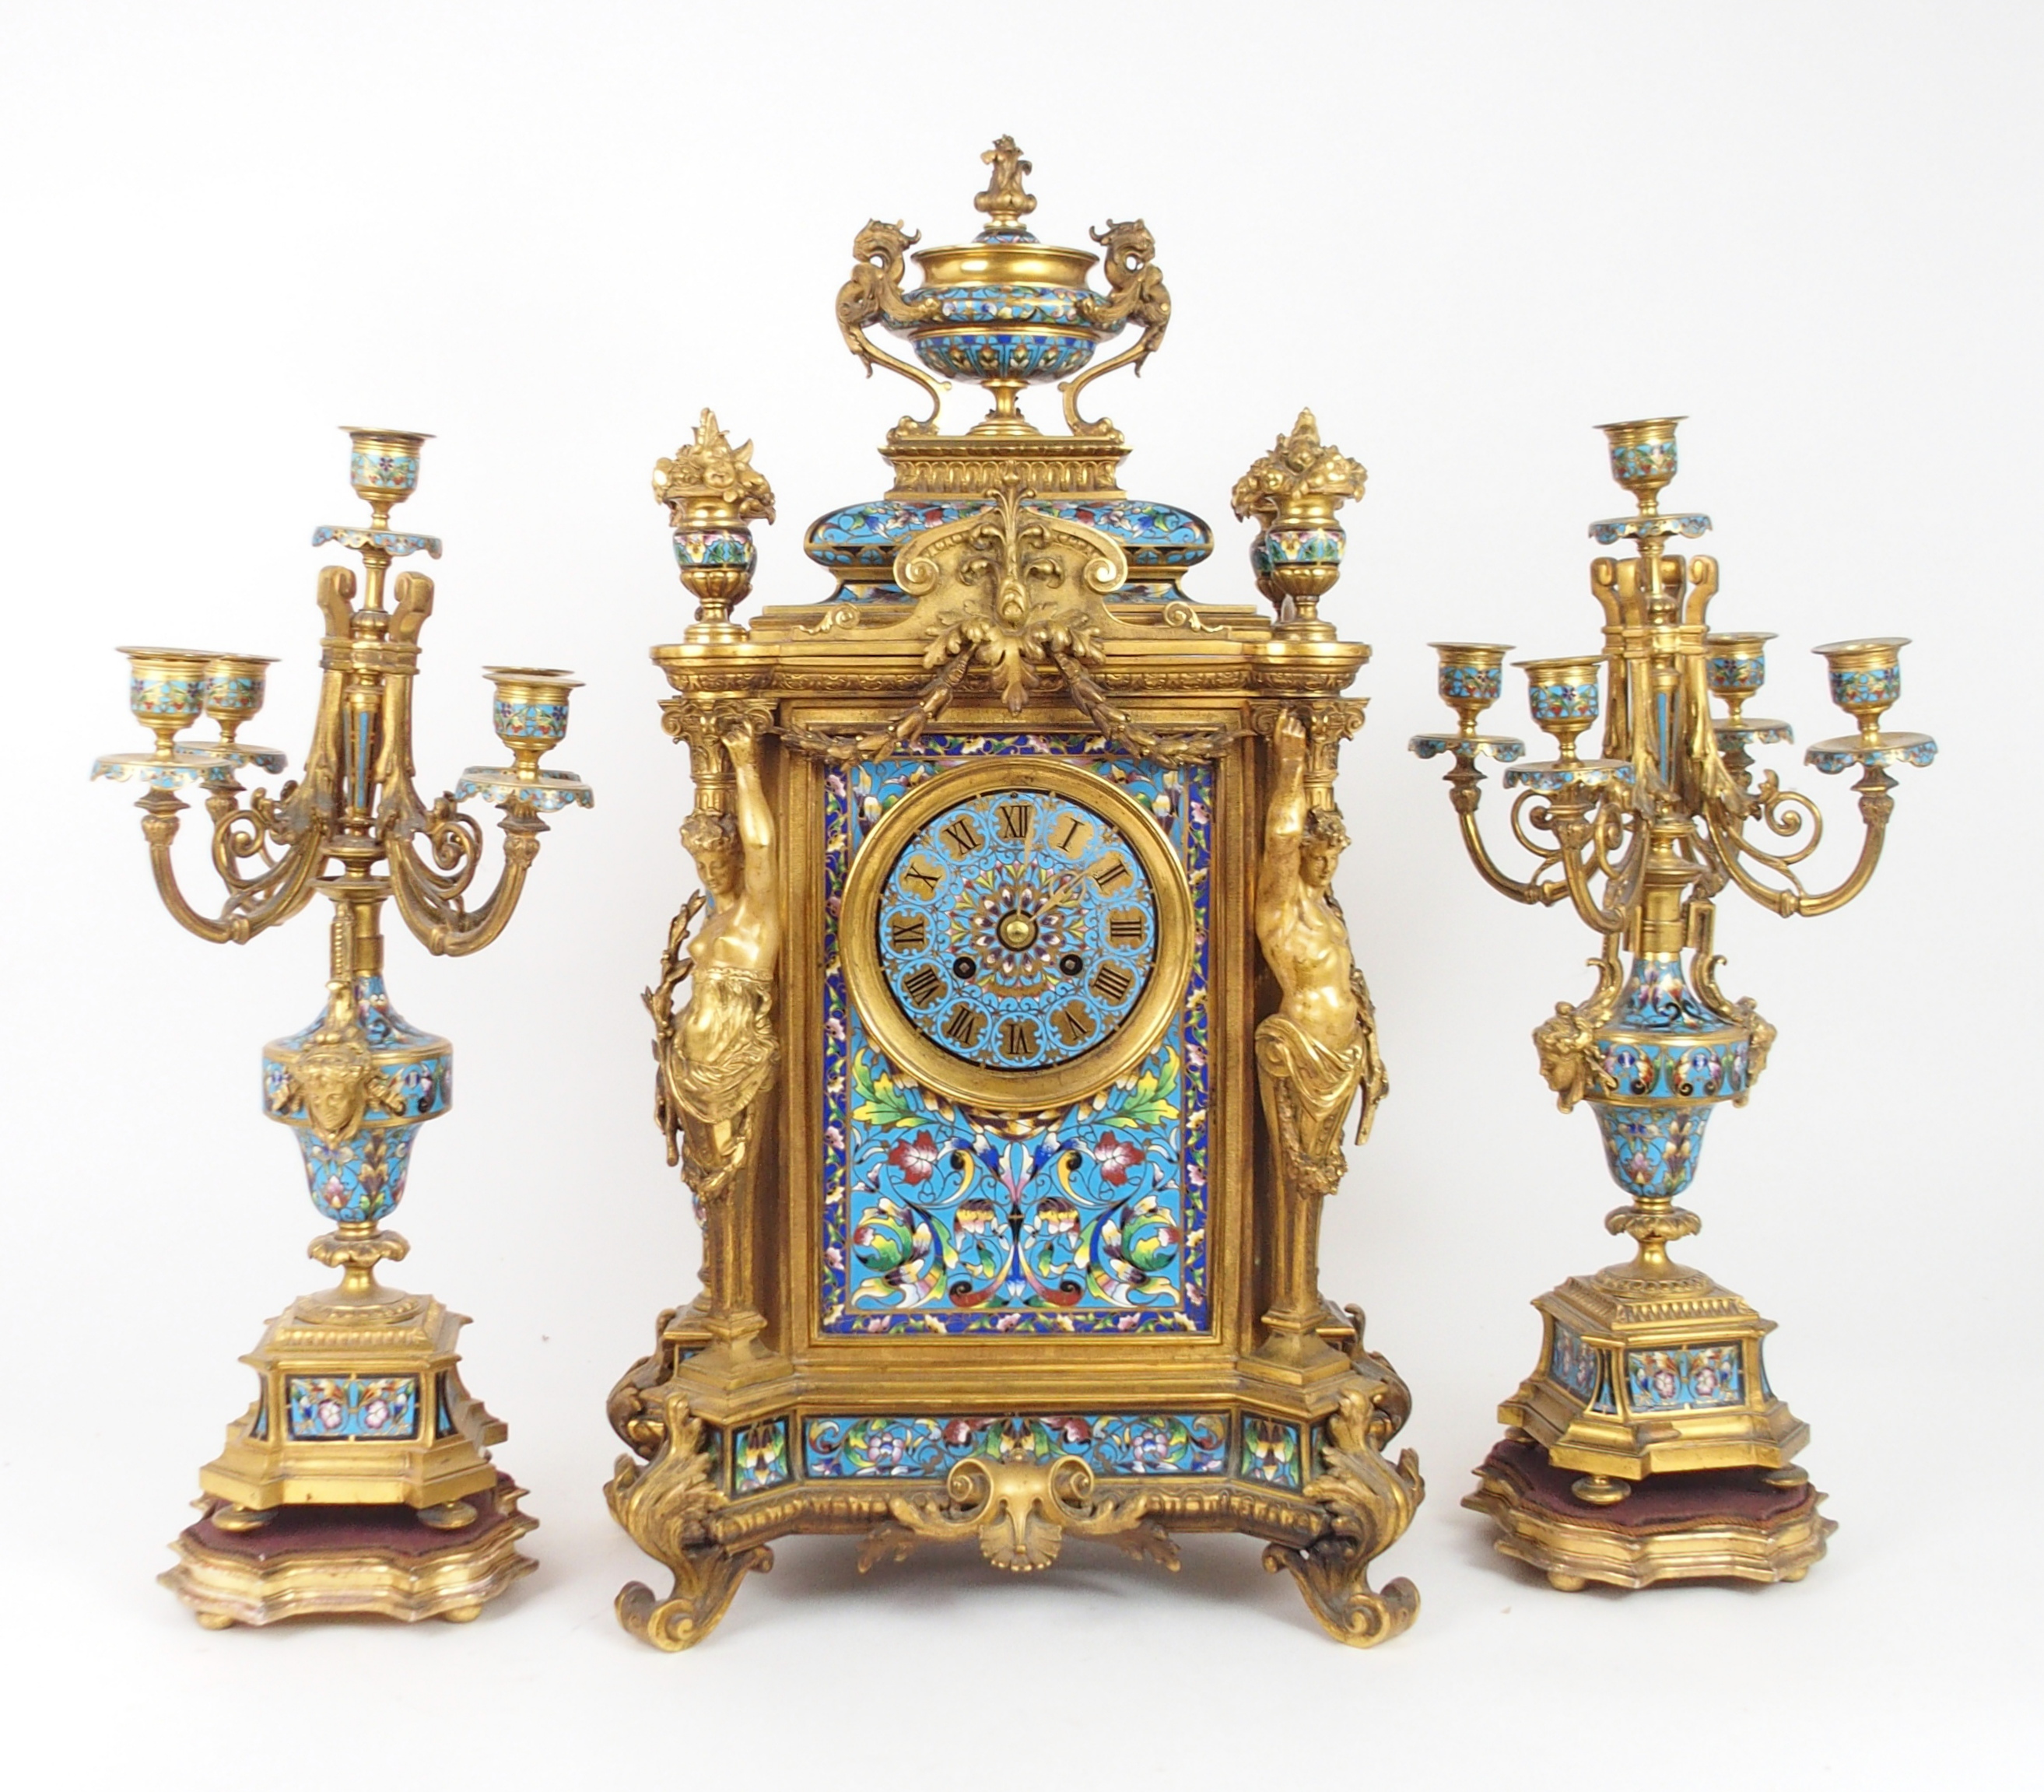 AN IMPRESSIVE 19TH CENTURY FRENCH CHAMPLEVE ENAMEL MANTLE CLOCK the urn mounted top with griffin han